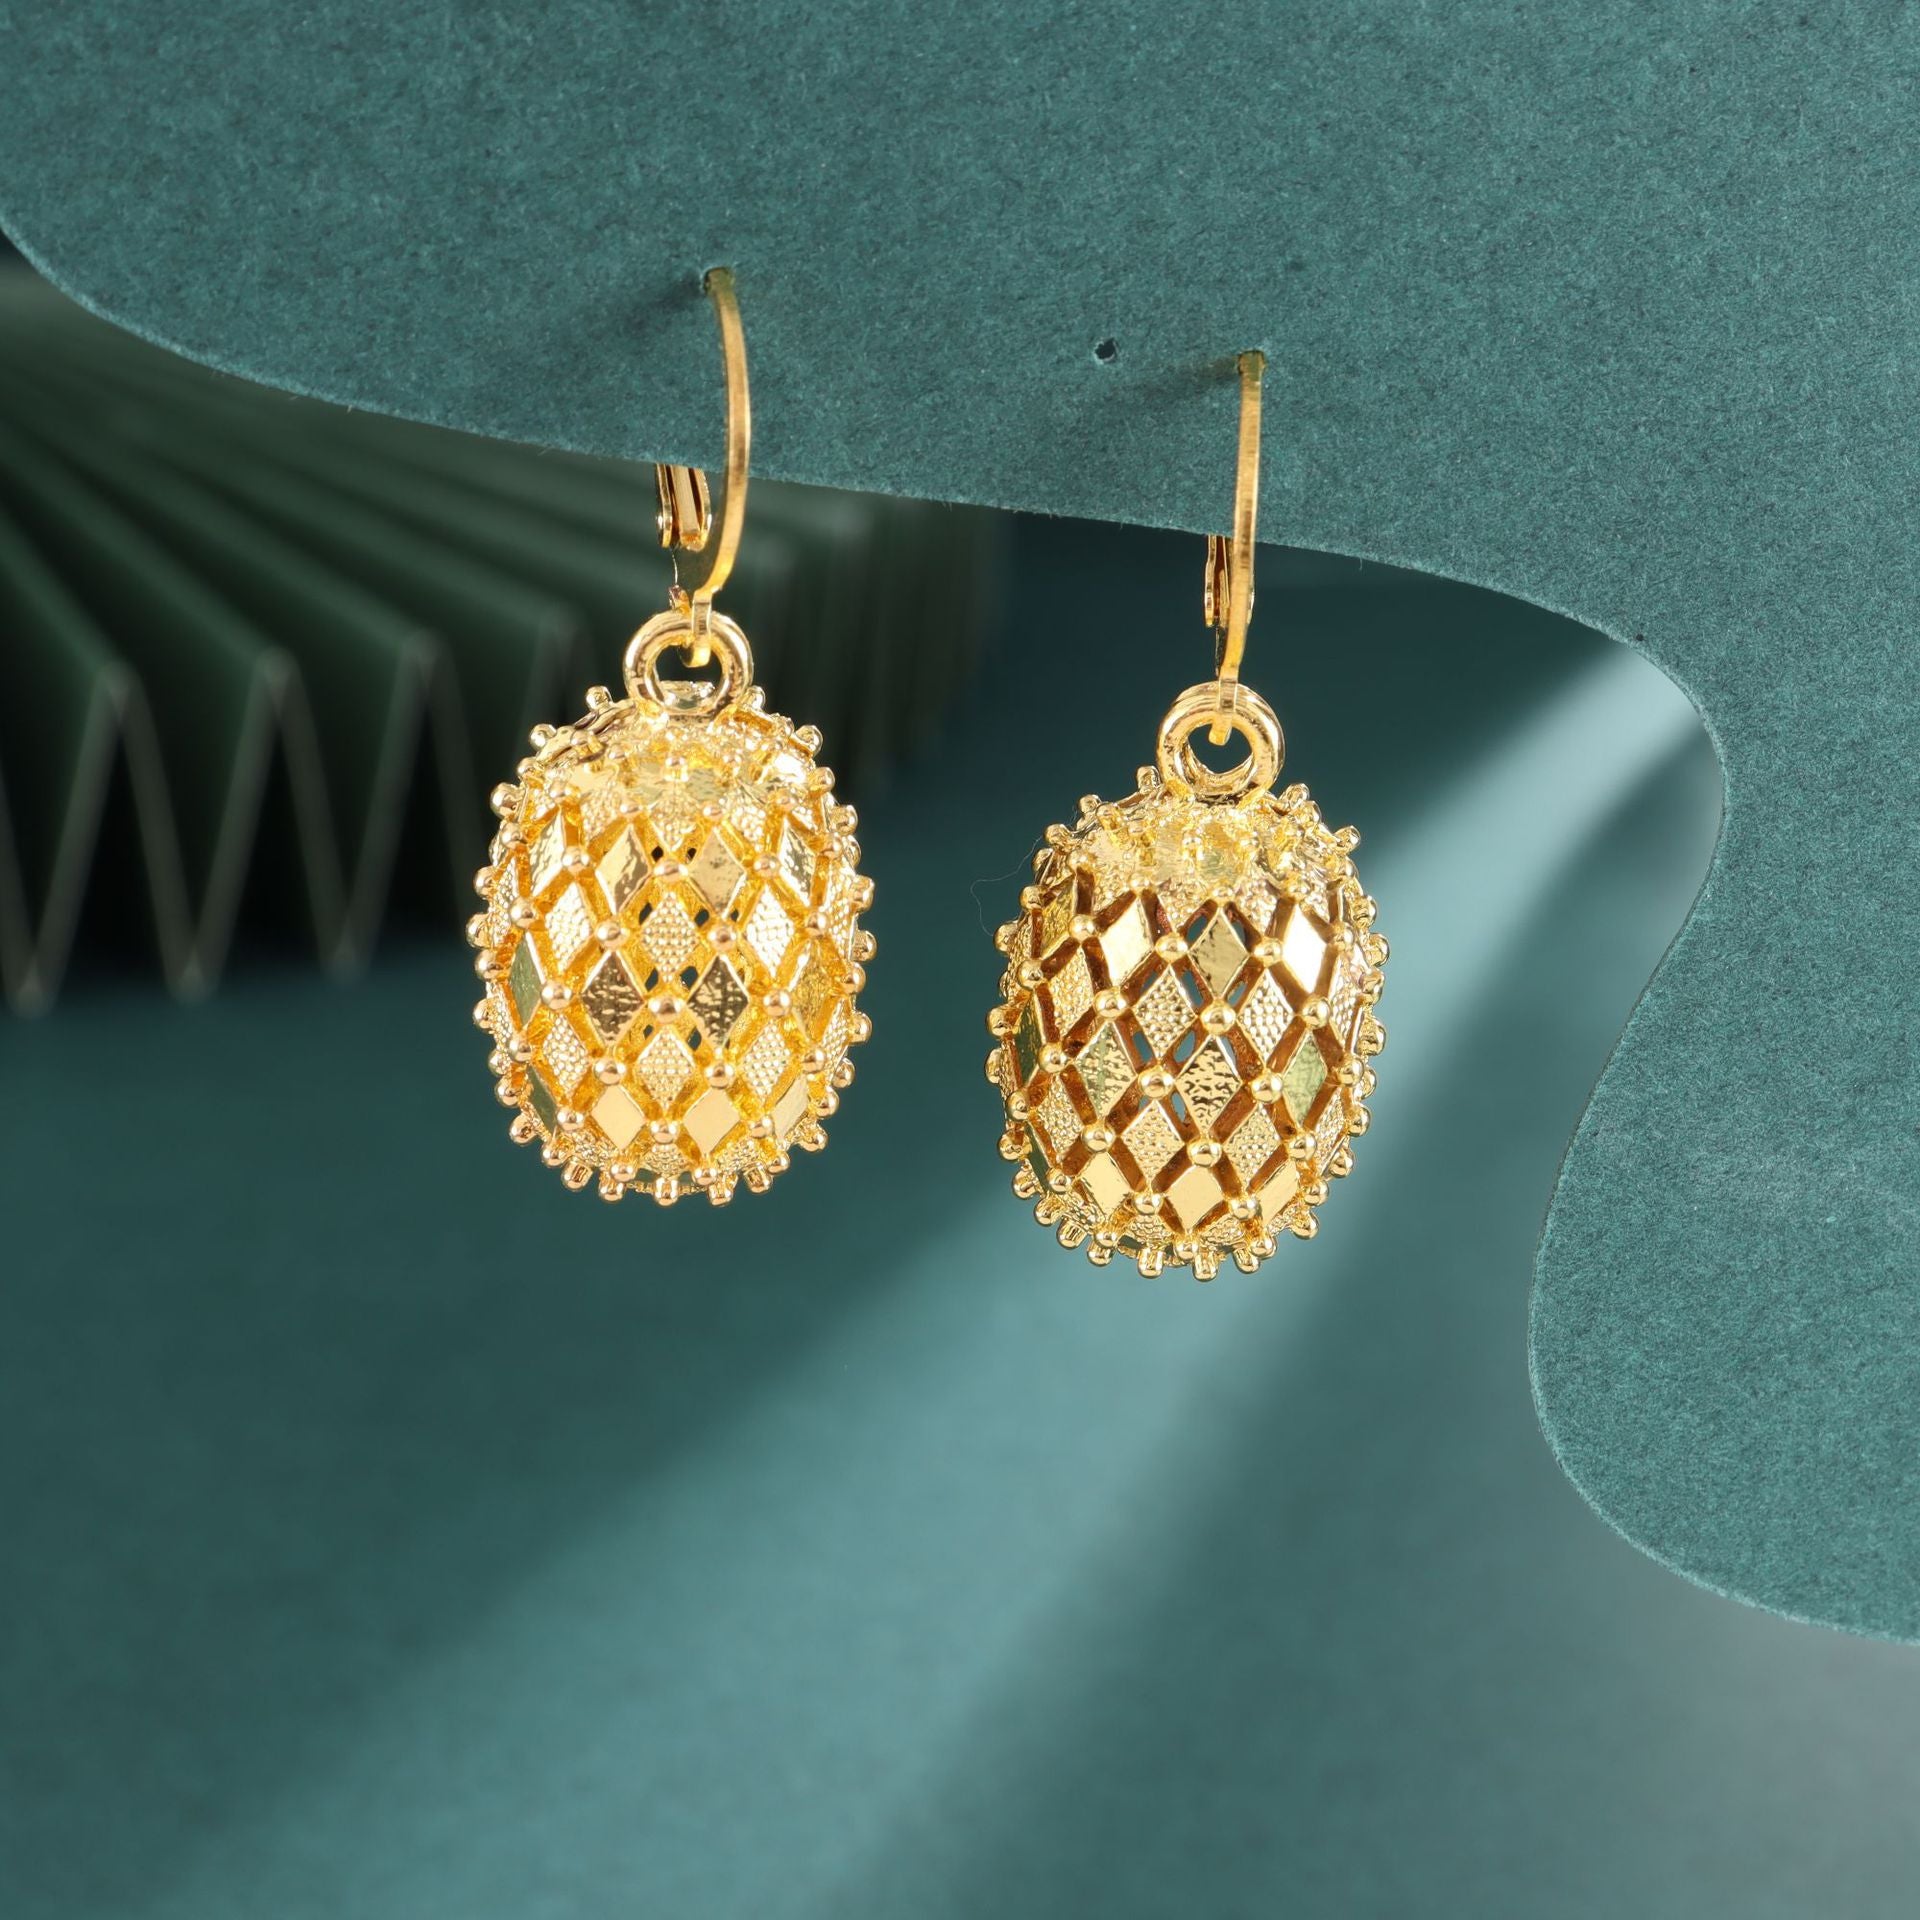 Hollow Copper Ball Earrings Gold Plated